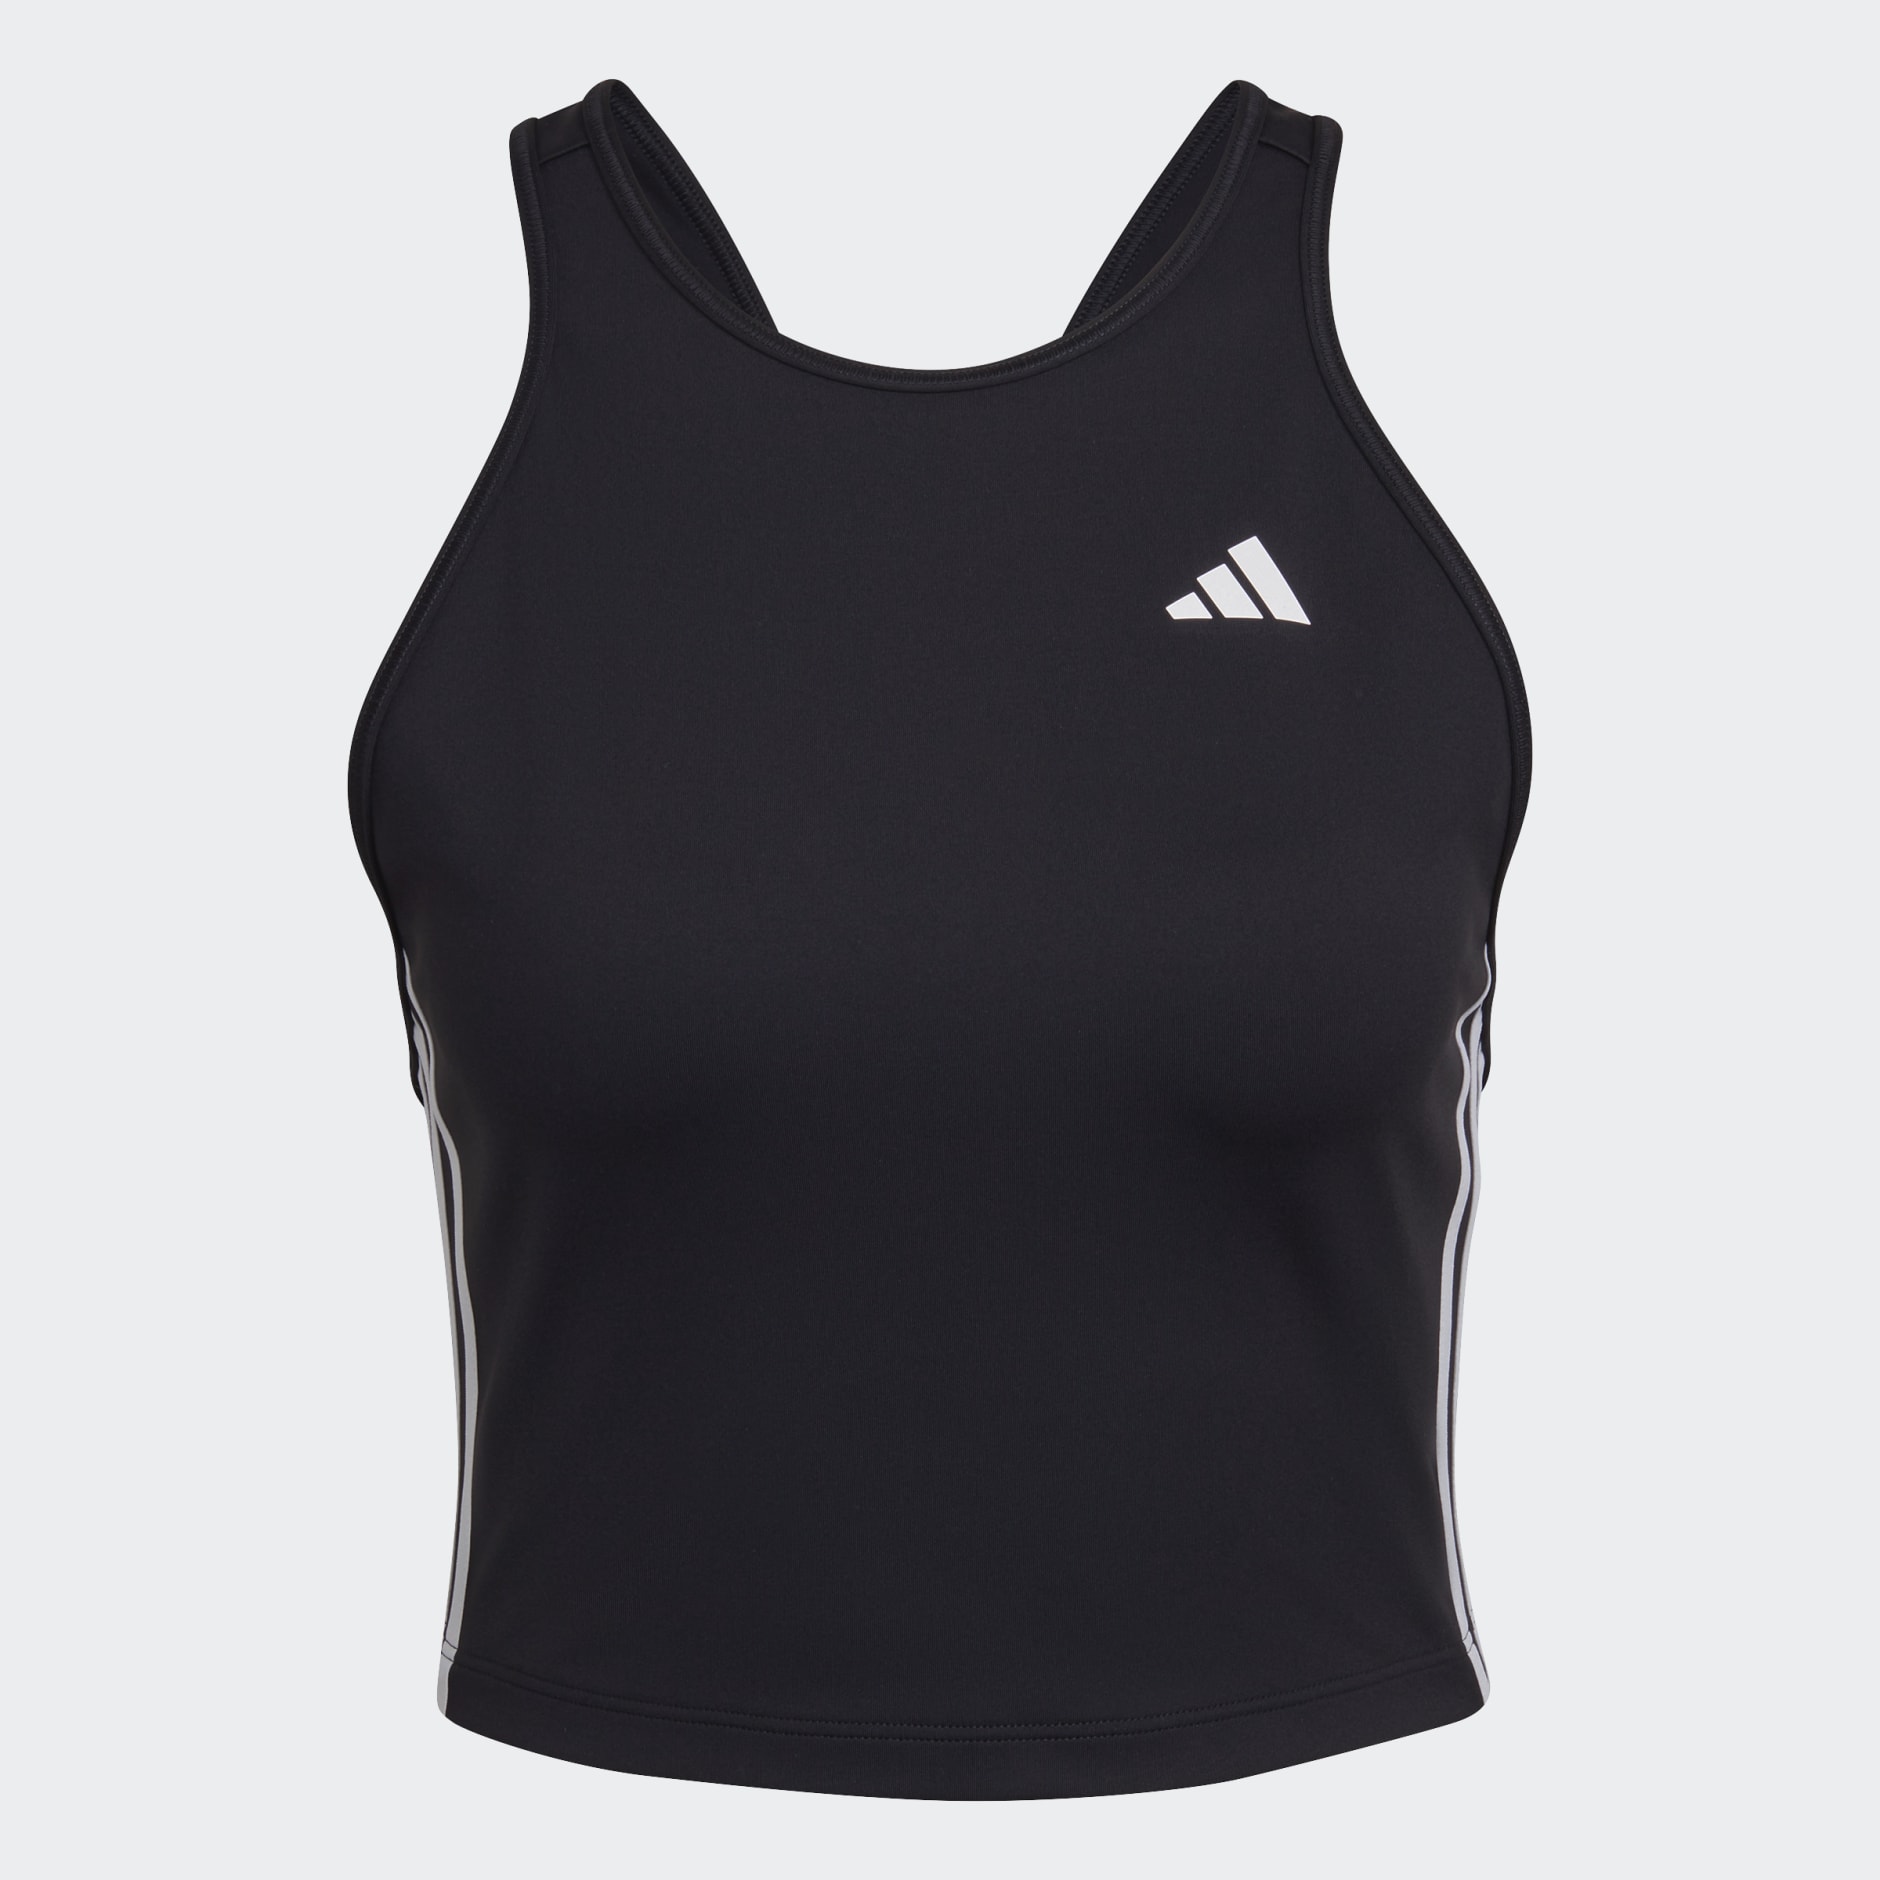 Women's Clothing - AEROREADY Made for Training 3-Stripes Crop Tank Top ...